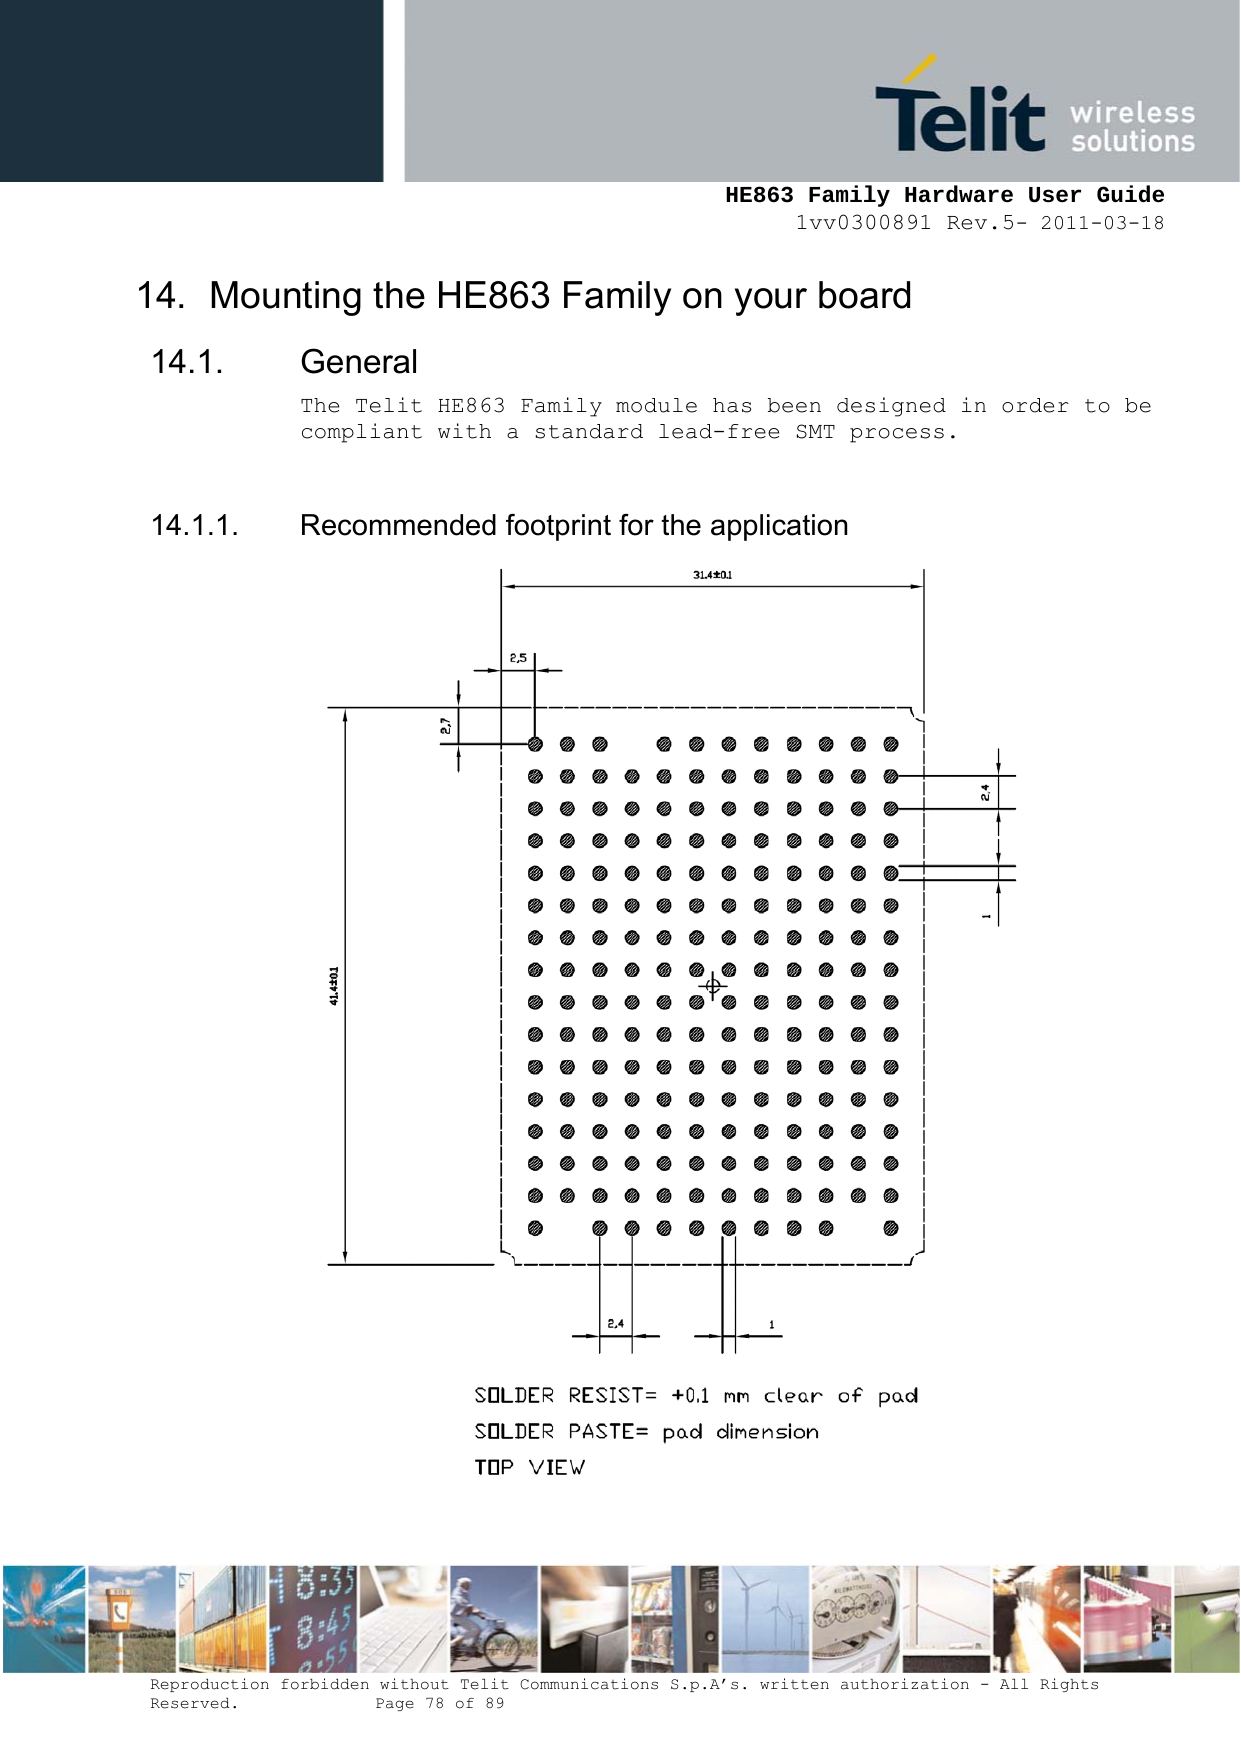     HE863 Family Hardware User Guide 1vv0300891 Rev.5- 2011-03-18    Reproduction forbidden without Telit Communications S.p.A’s. written authorization - All Rights Reserved.    Page 78 of 89  14.  Mounting the HE863 Family on your board 14.1. General The Telit HE863 Family module has been designed in order to be compliant with a standard lead-free SMT process.  14.1.1.  Recommended footprint for the application  